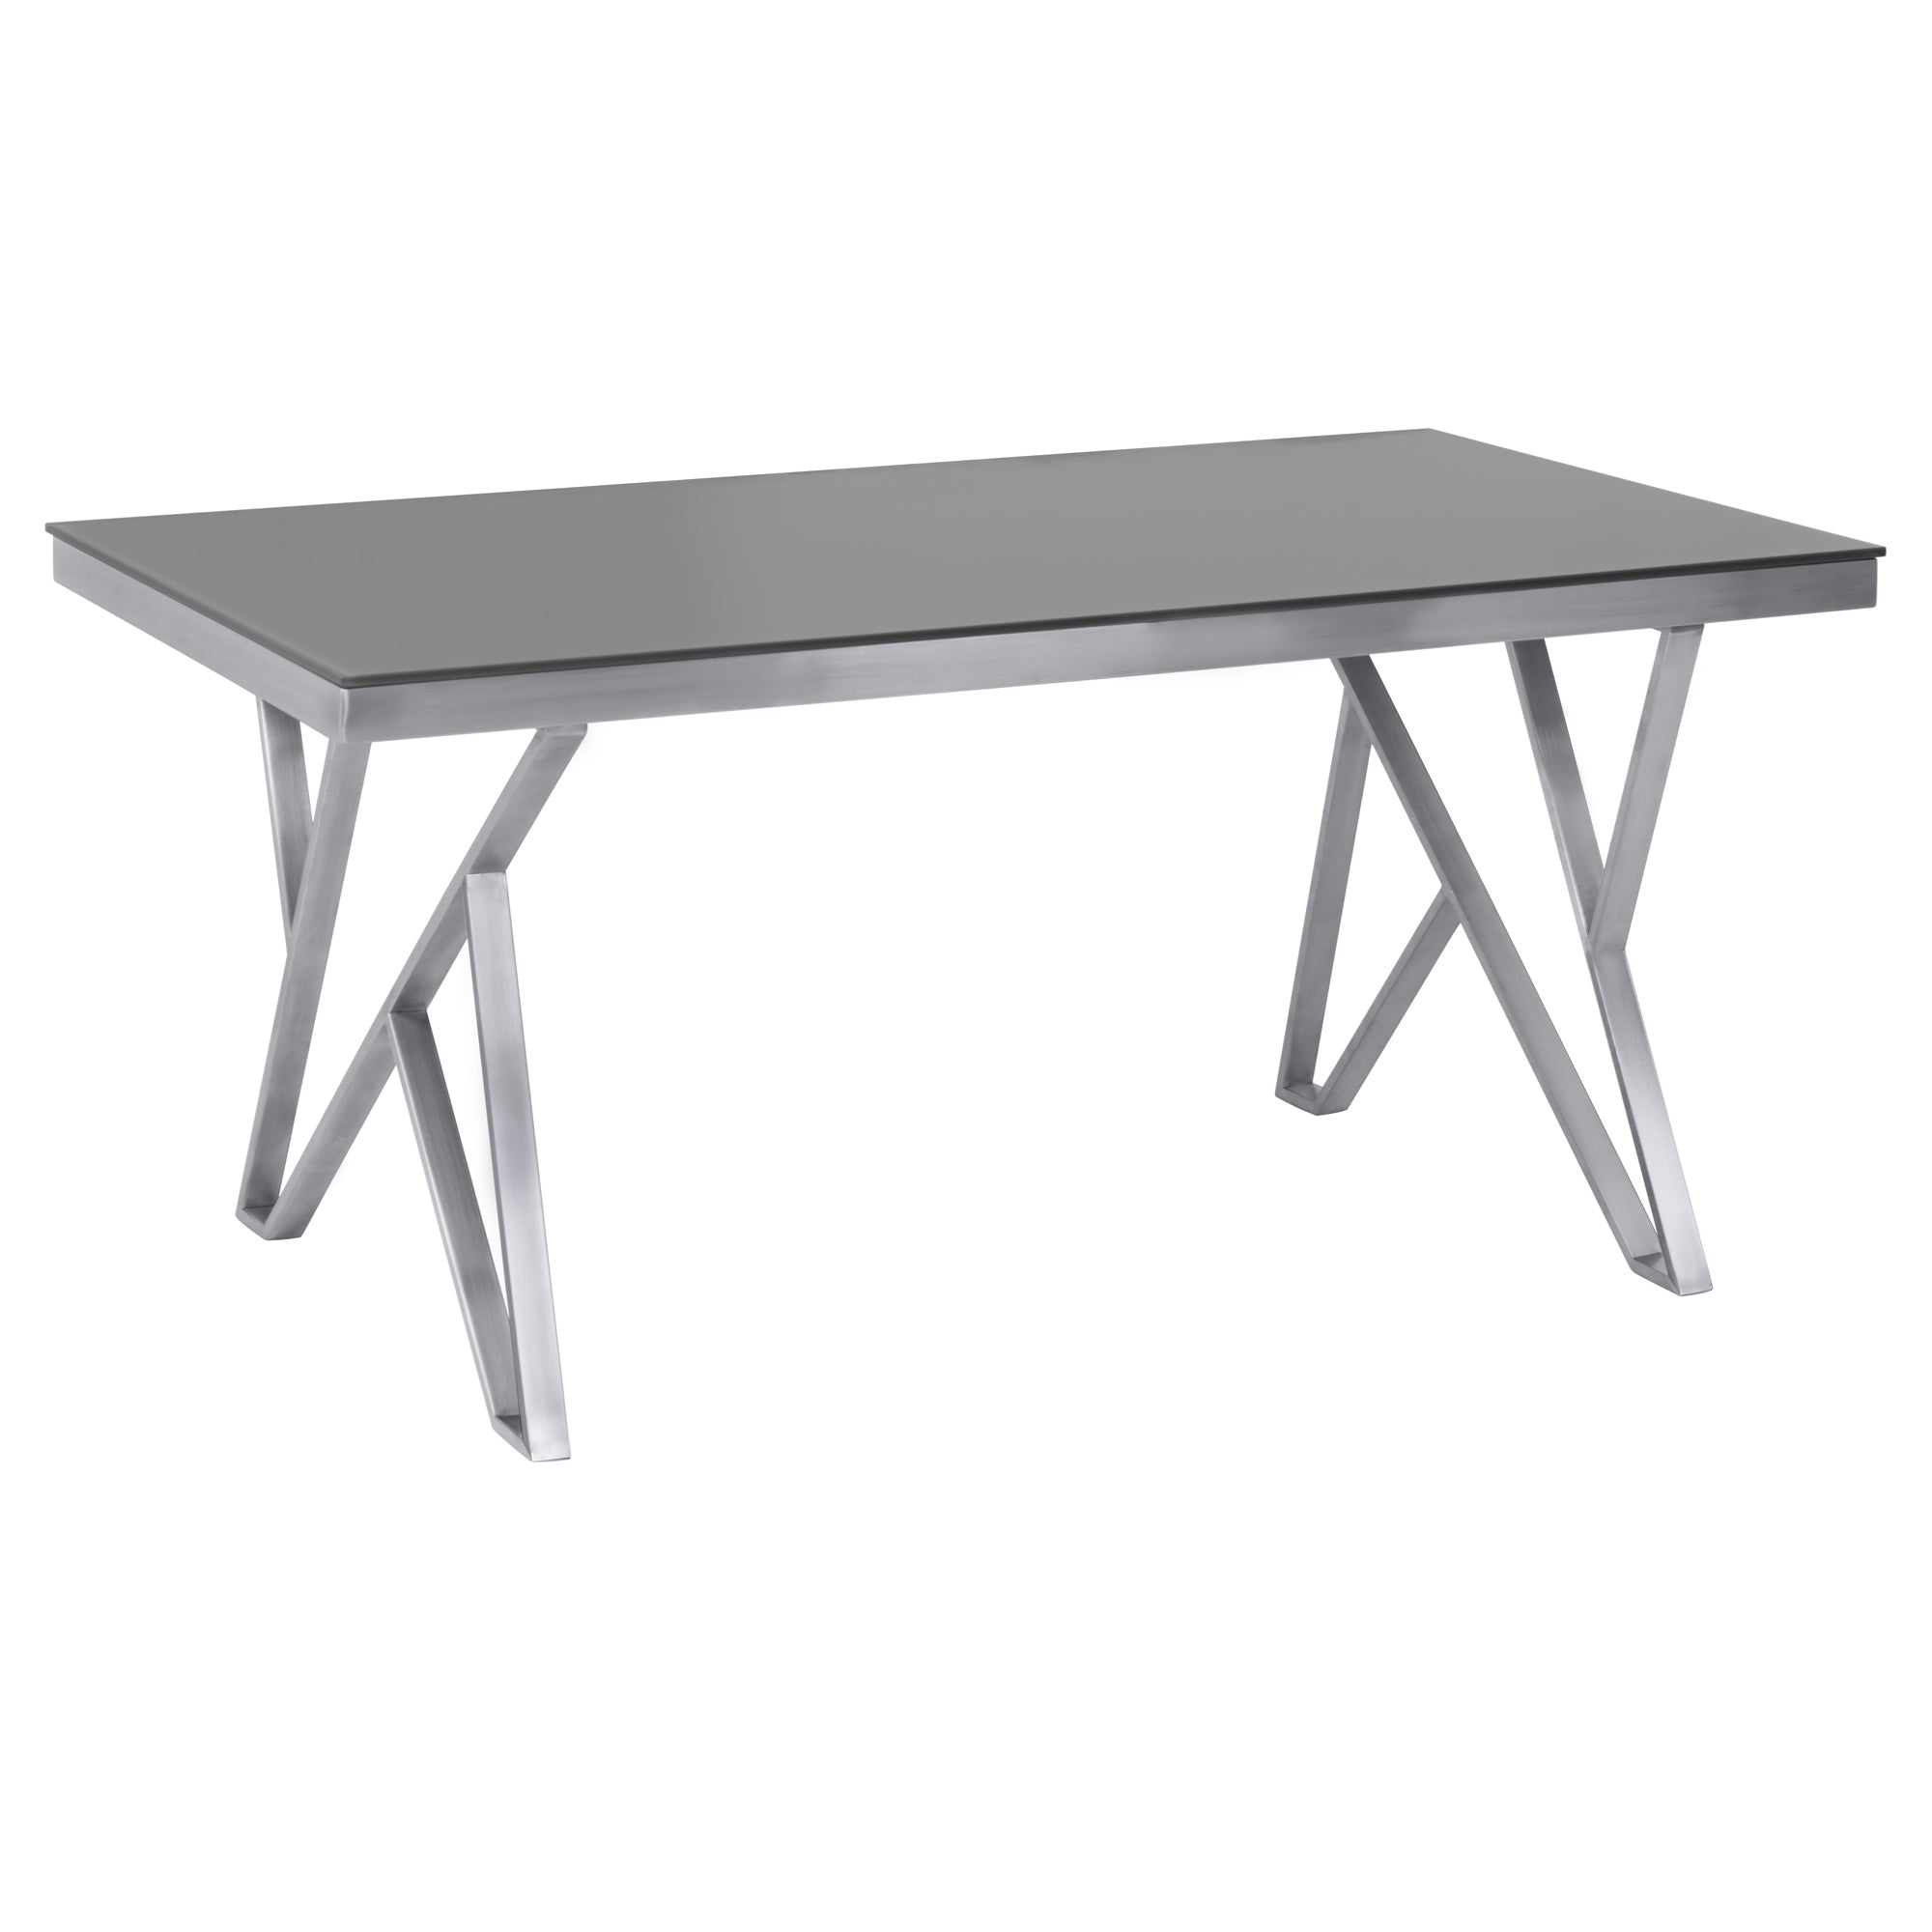 Armen Living Lcmrditogg Mirage Contemporary Dining Table In Brushed Stainless Steel And Gray Tempered Glass Top